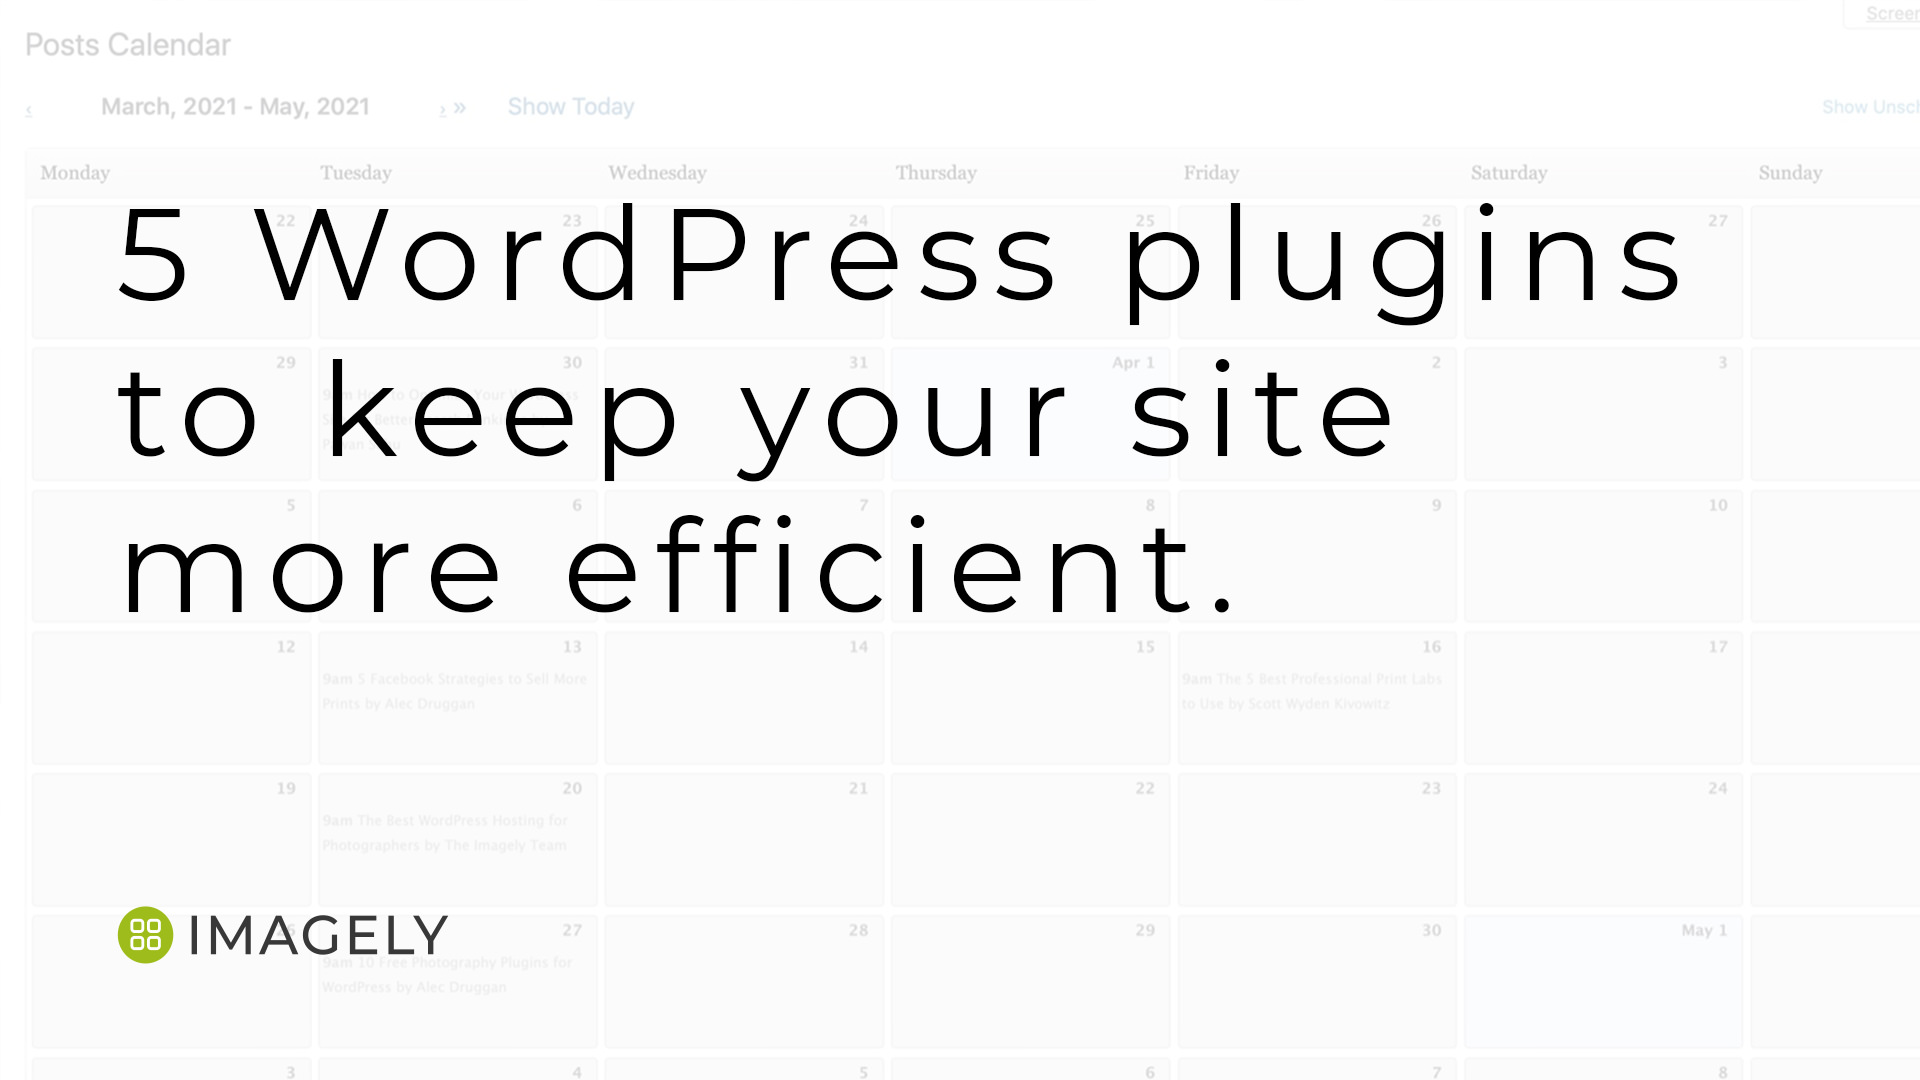 5 WordPress plugins to keep your site more efficient